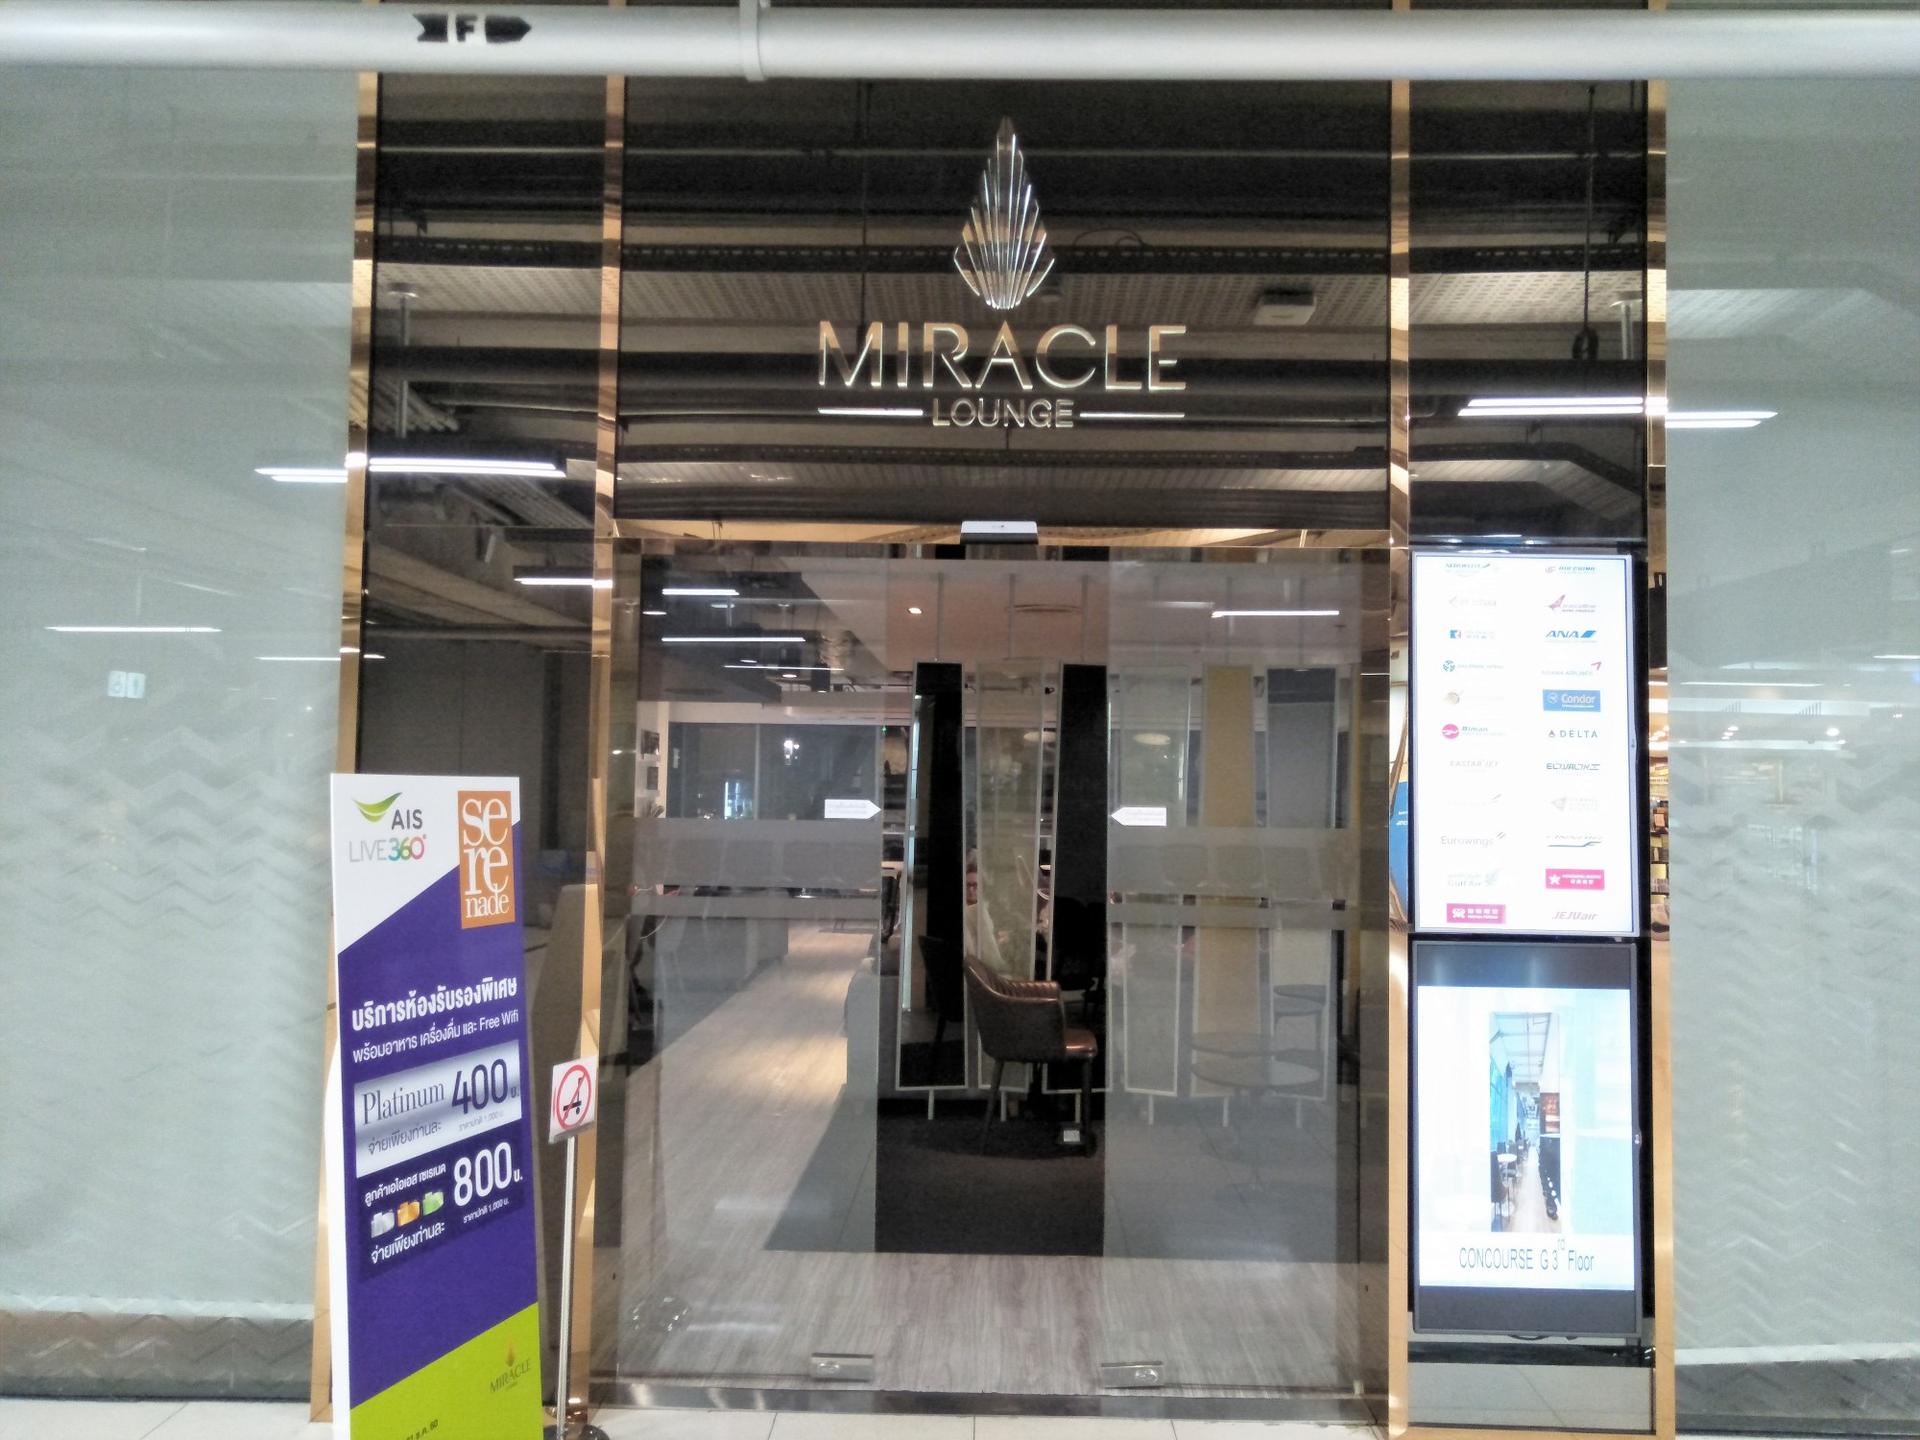 Miracle First Class Lounge image 20 of 34